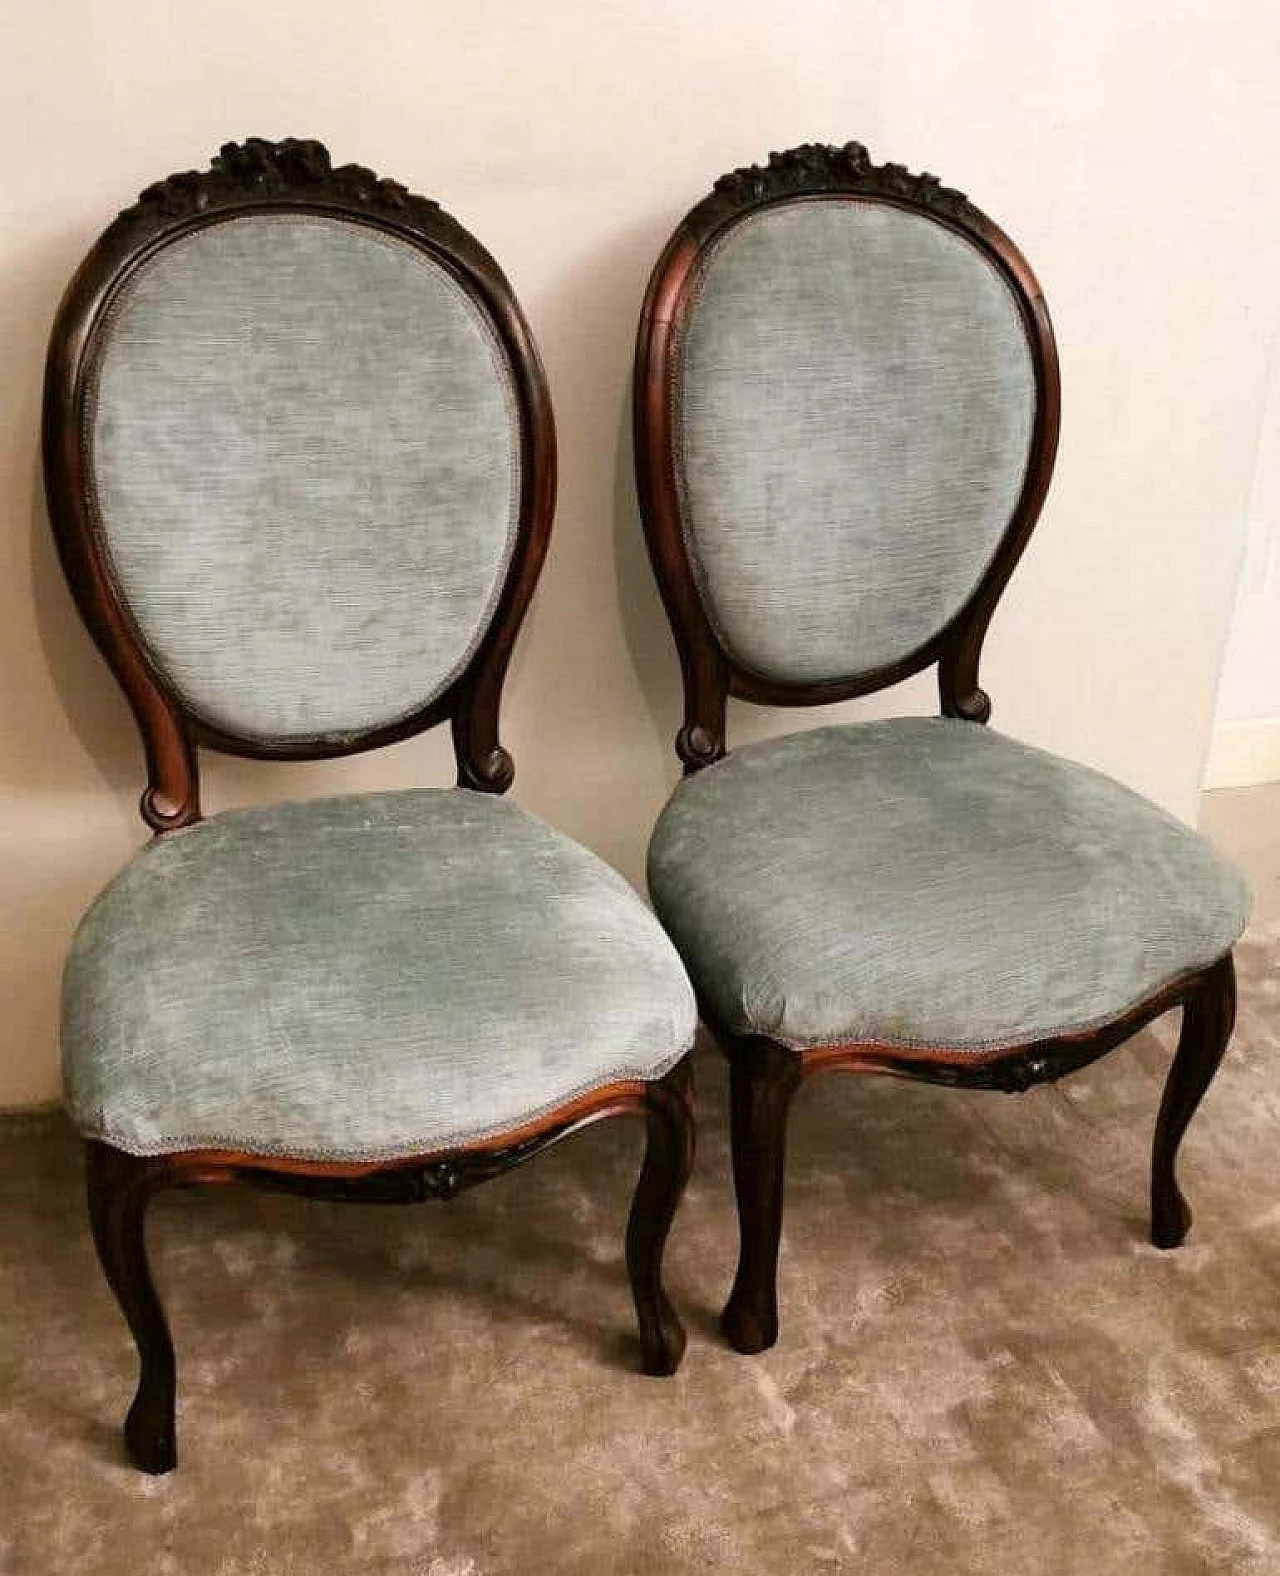 Pair of Napoleon III bedroom chairs in carved mahogany, 19th century 1188976